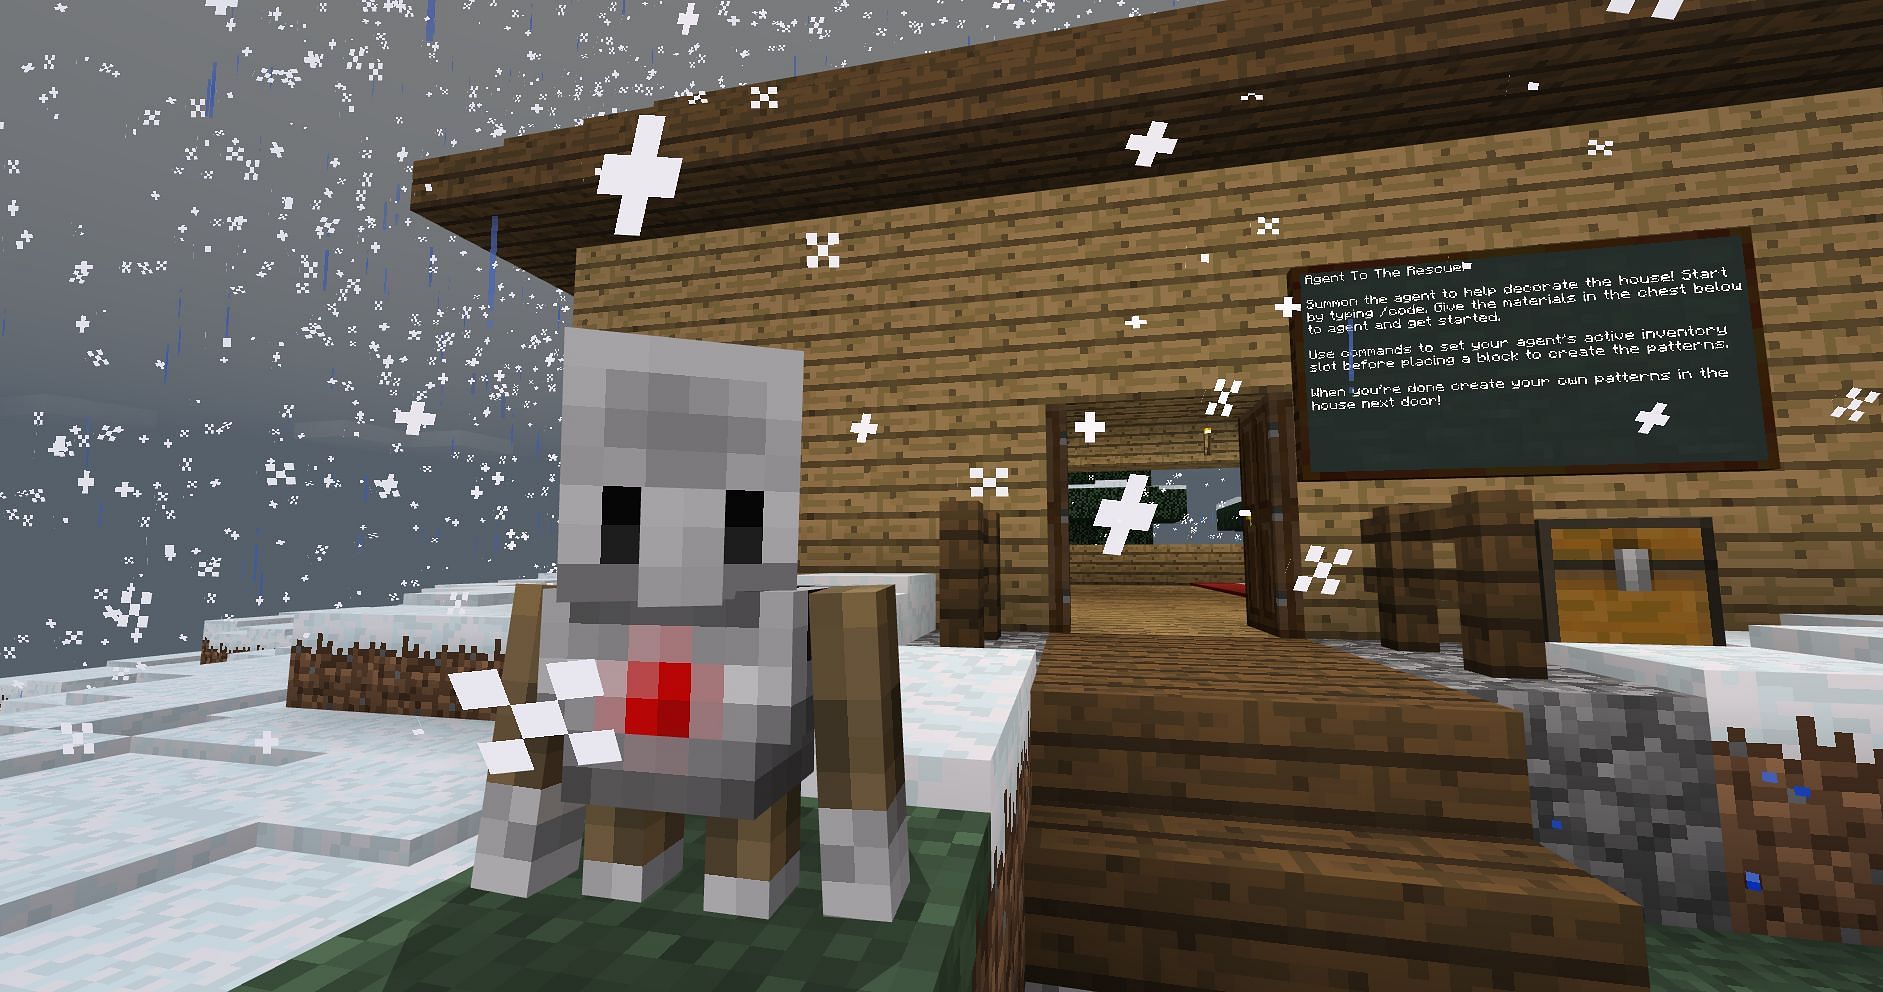 The Agent is an NPC in Minecraft Education Edition that teaches coding. Image via Minecraft